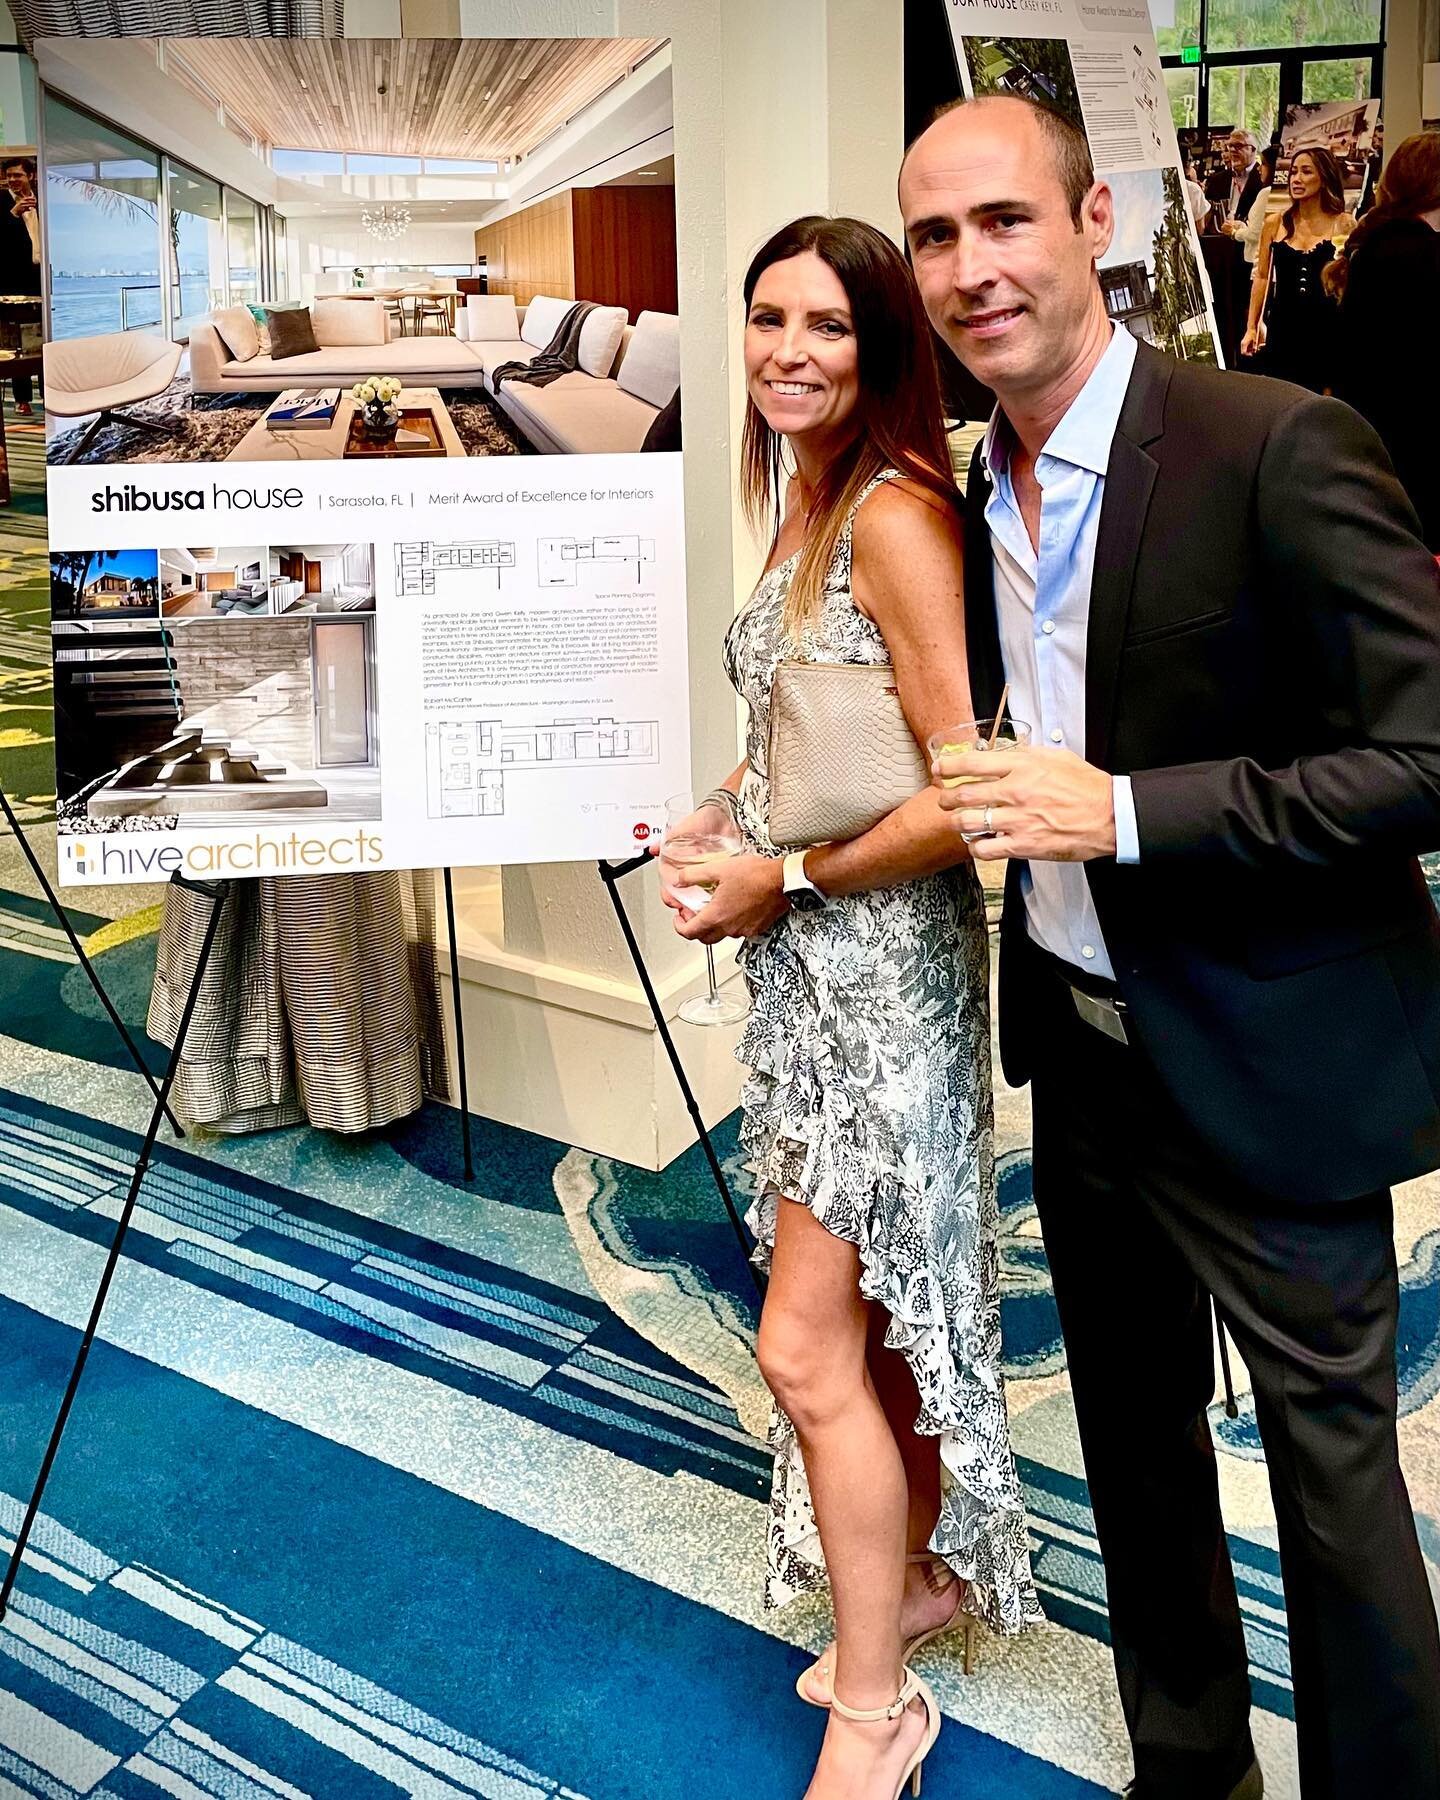 Hive Architects Inc. is honored to have received (2) @aia_florida design awards for our 𝗦𝗵𝗶𝗯𝘂𝘀𝗮 project last Saturday at the Hyatt Recency Grand Cypress in Orlando.

▪️ Merit Award of Excellence for New Work
▪️ Merit Award of Excellence for In